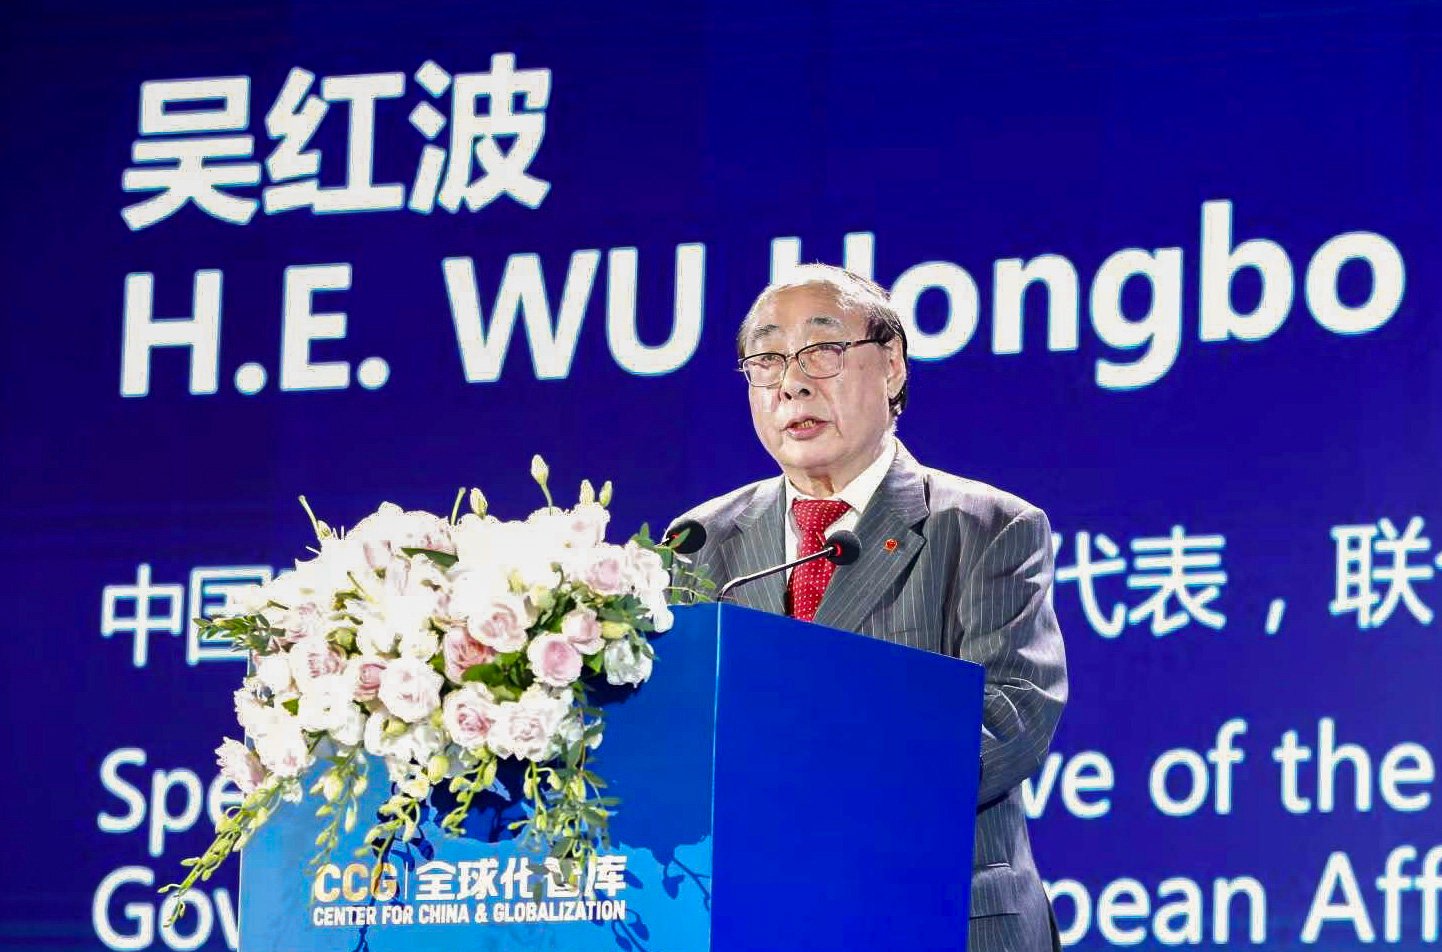 “A world of turbulence and change requires Europe to strengthen its strategic autonomy,” Beijing envoy and former UN deputy secretary general Wu Hongbo says in a wide-ranging interview with a state-owned media outlet. Photo: Weibo